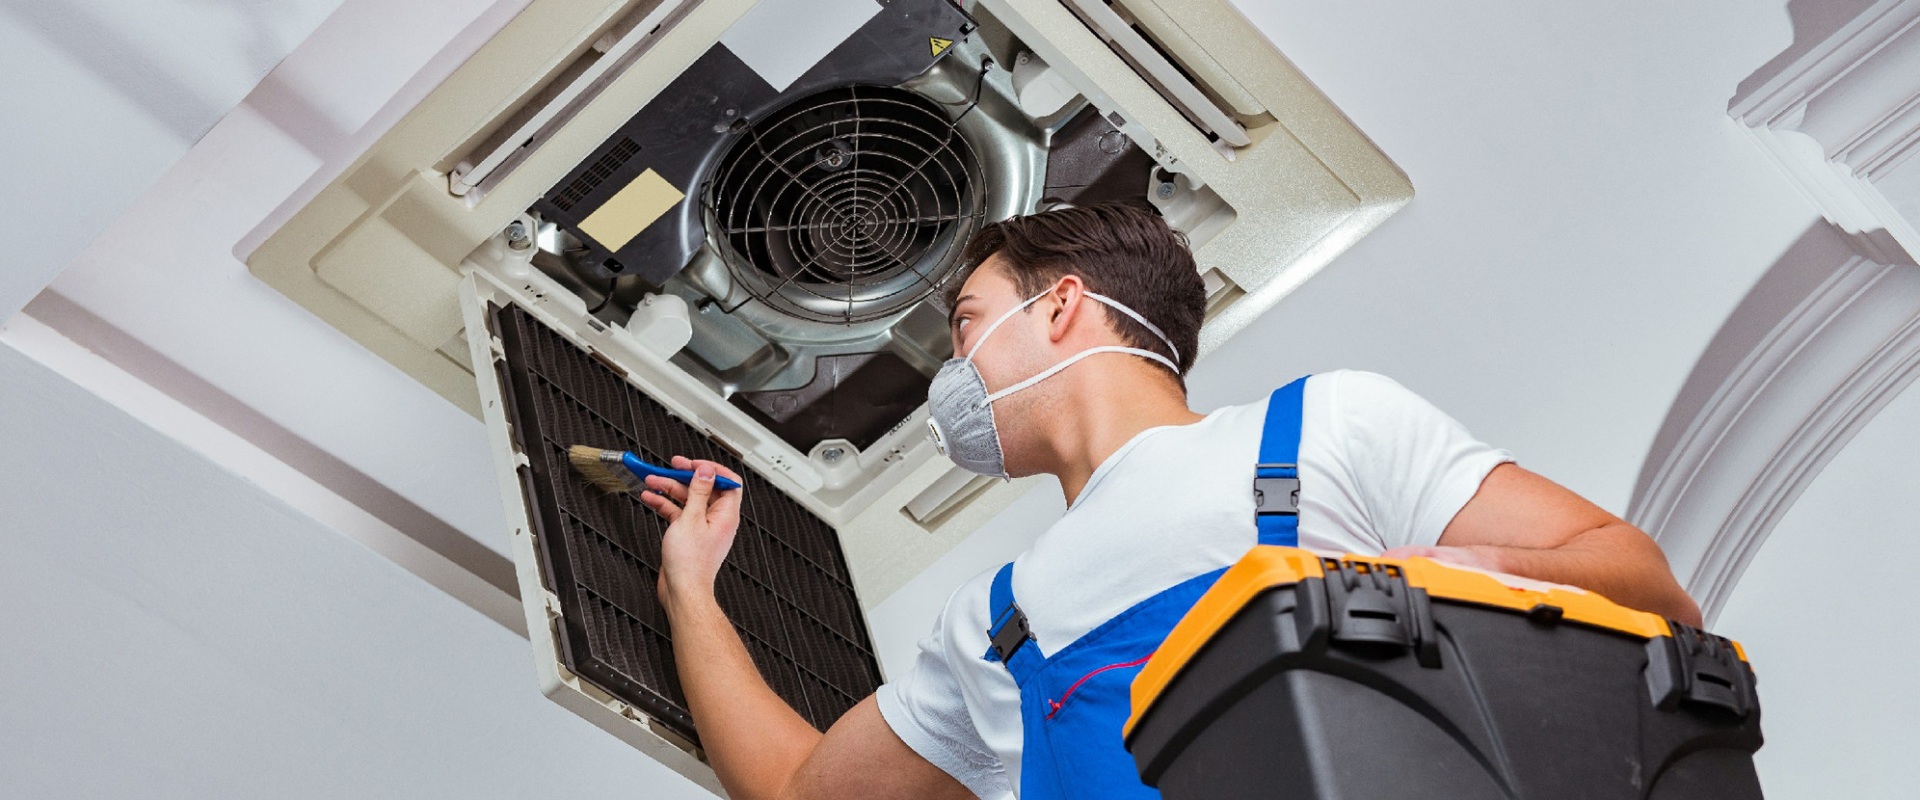 Duct Repair Services in Miami-Dade County, FL: Get the Best Professional Help